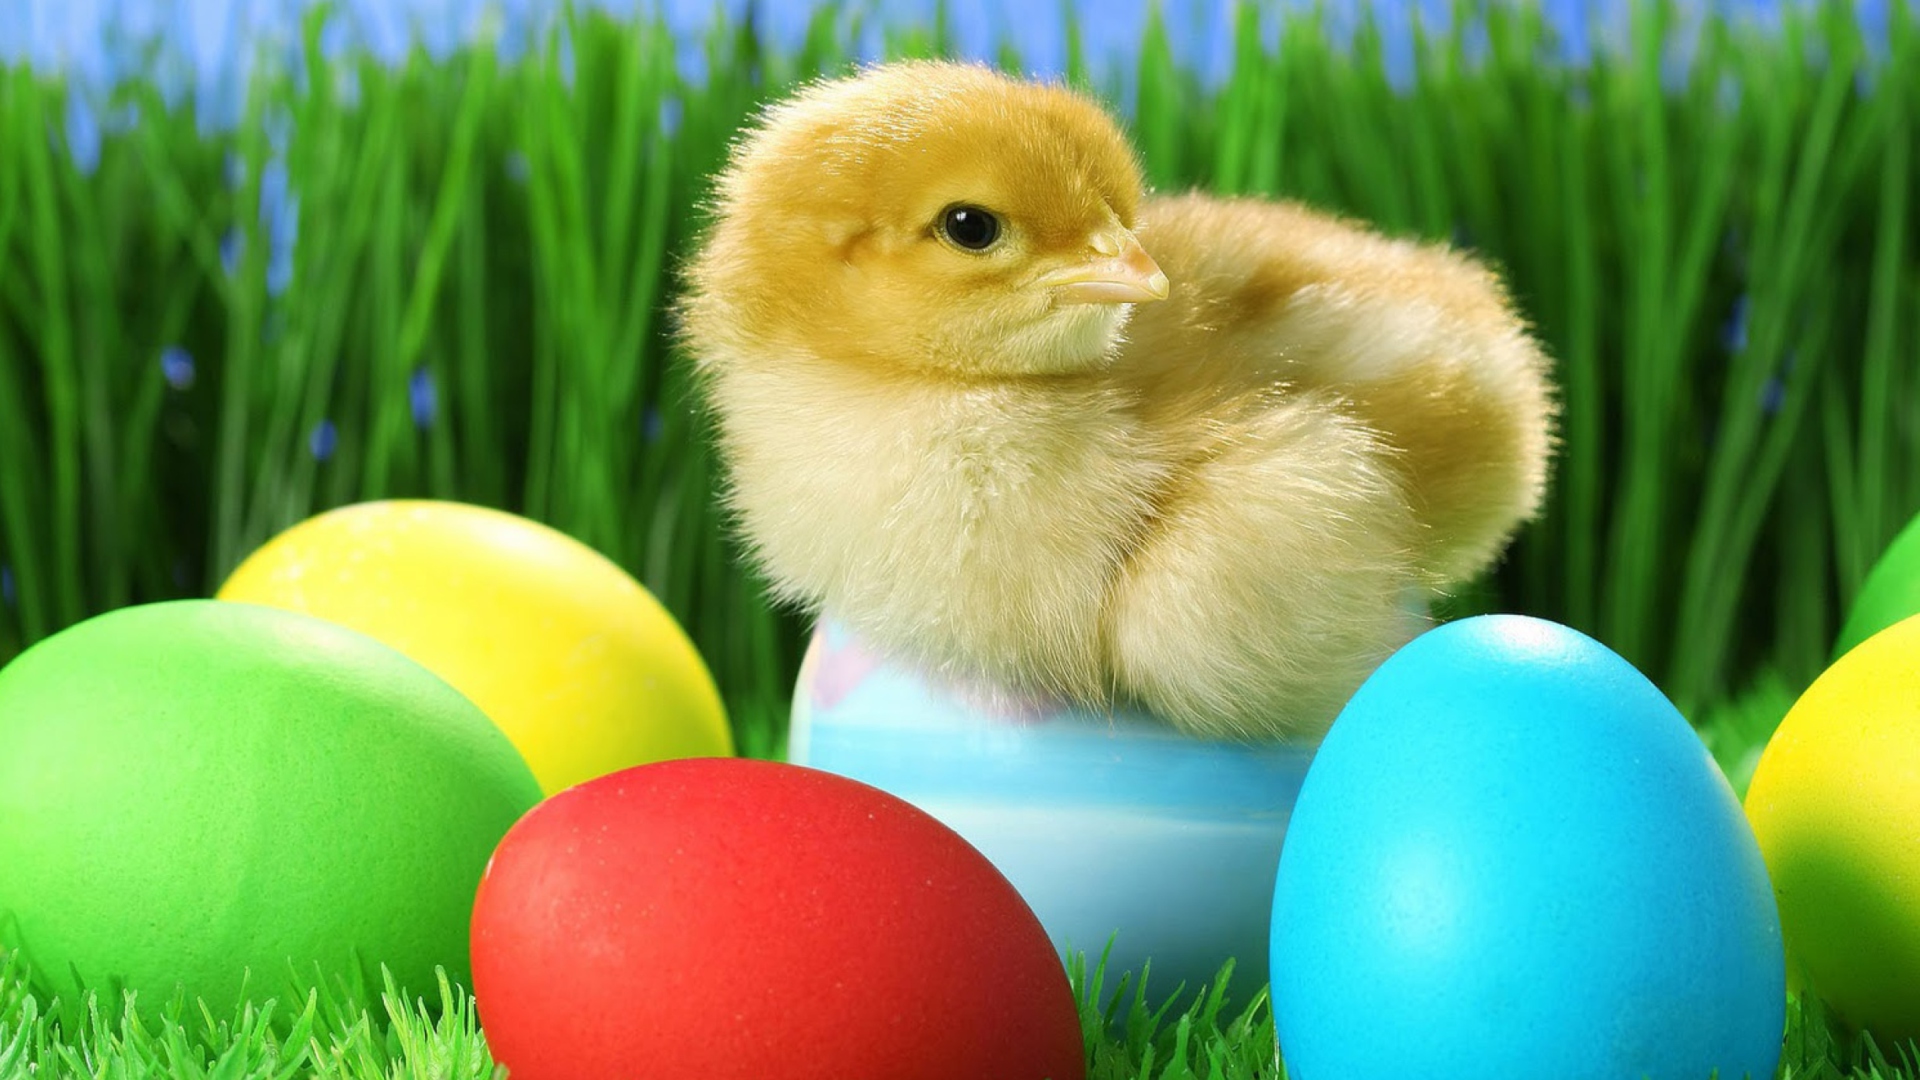 Yellow Chick And Easter Eggs wallpaper 1920x1080